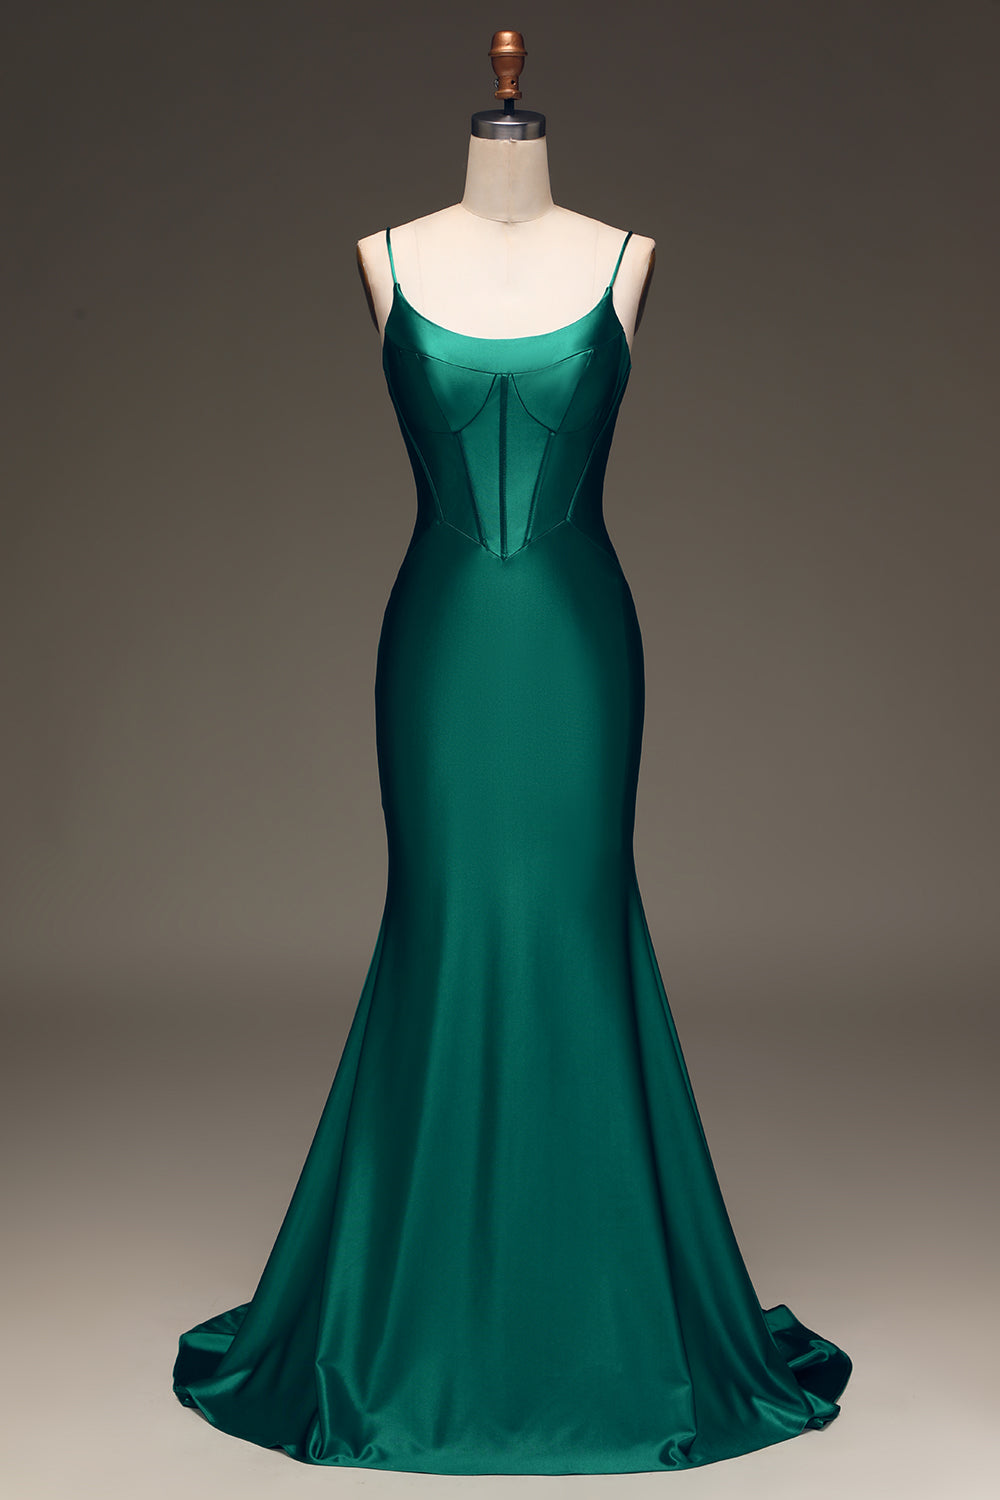 Satin Green Mermaid Simple Prom Dress with Lace-up Back